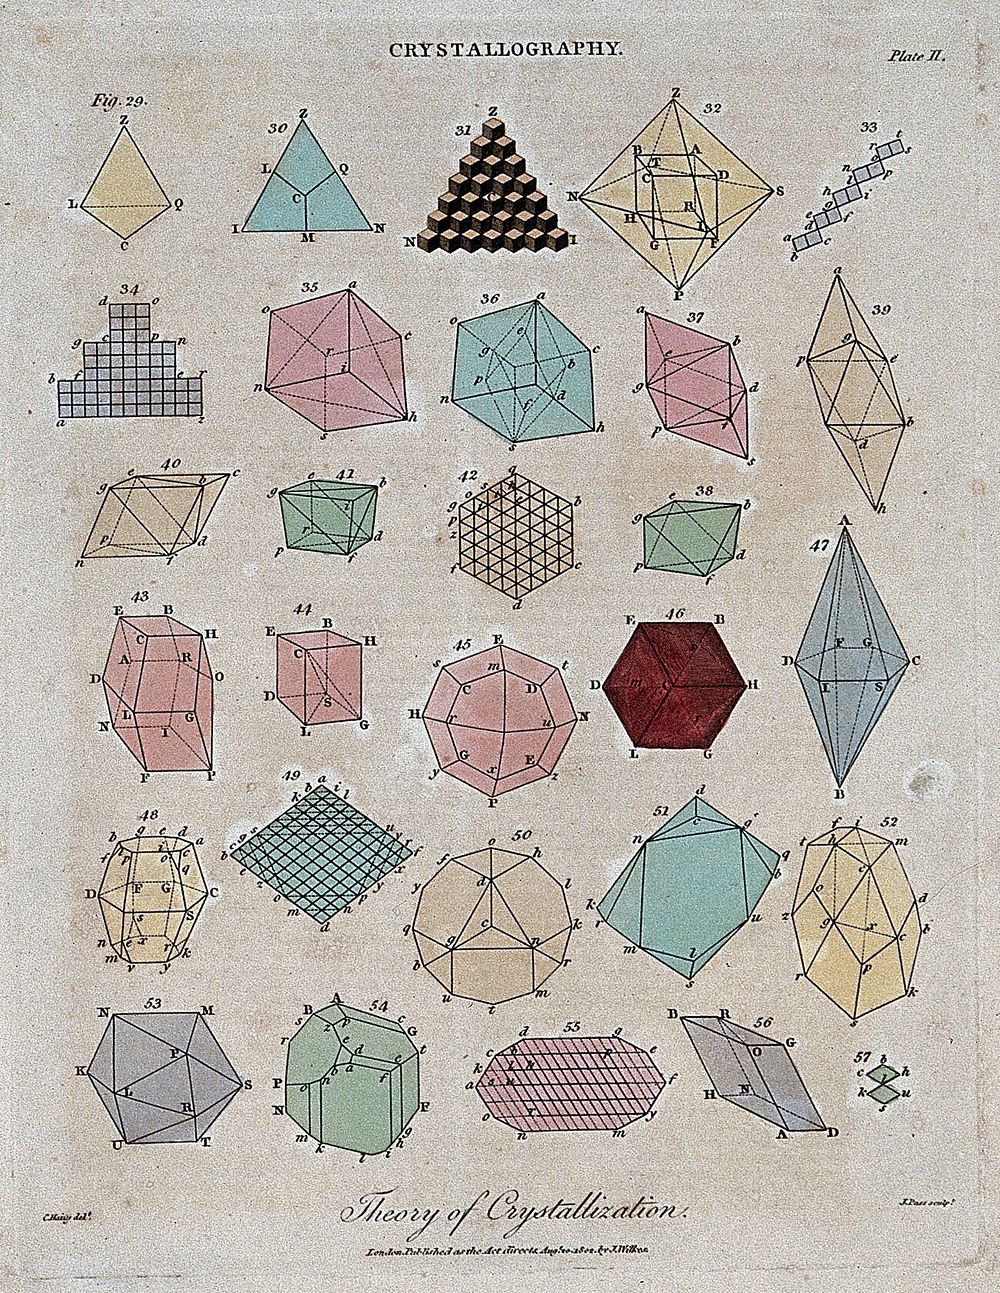 Chemistry: geometric representations of crystalline substances. Coloured engraving by J. Pass, 1802, after C. Hauy.